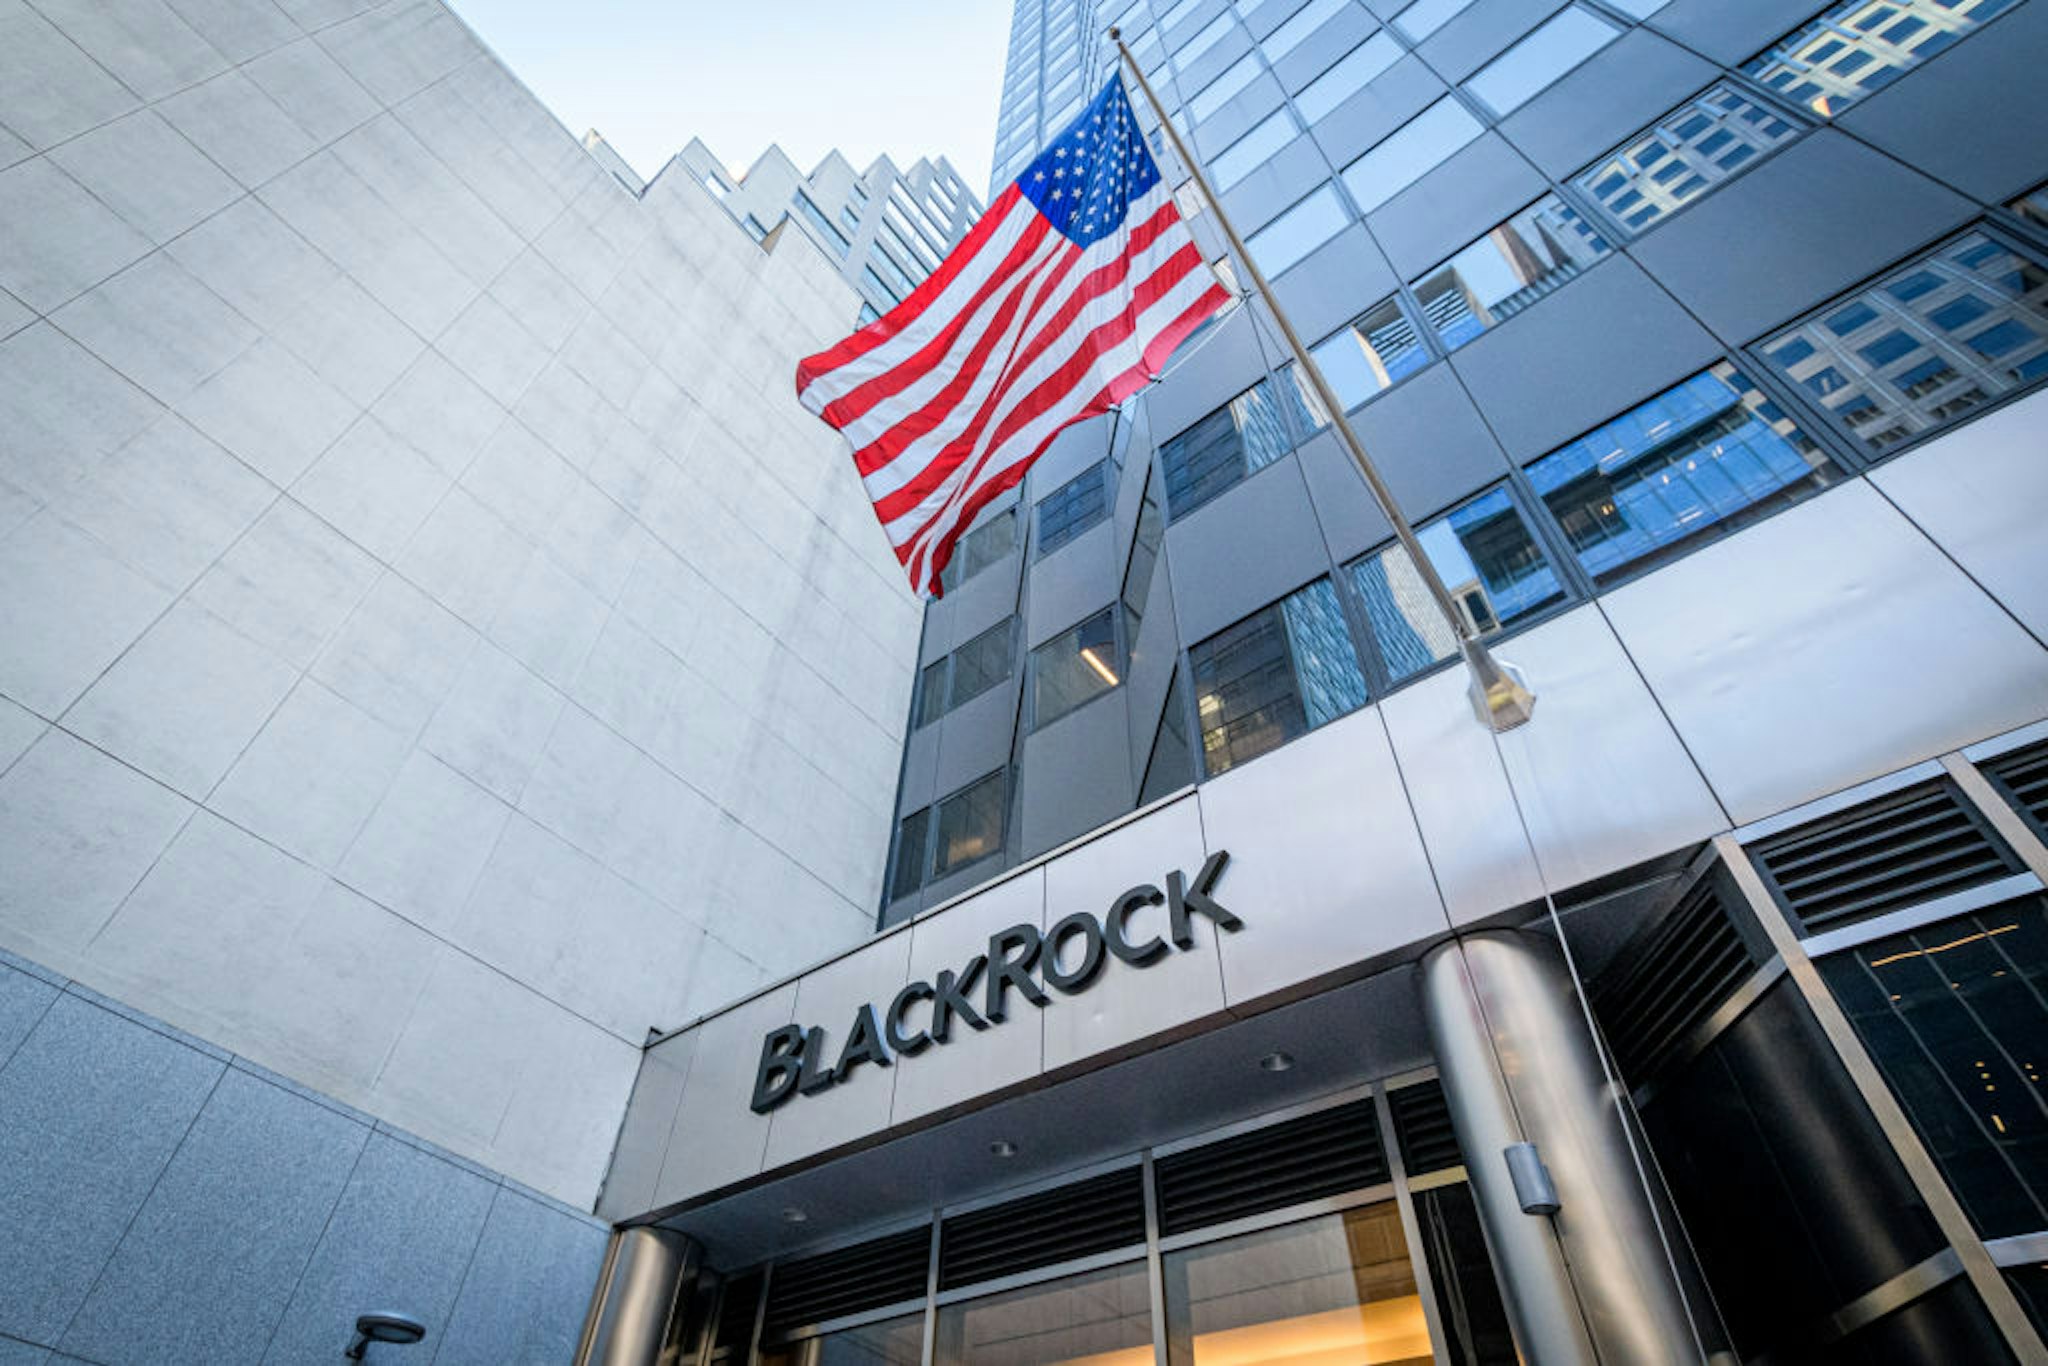 BlackRock Introduces First Mass Layoff In Years After Losing 1.5